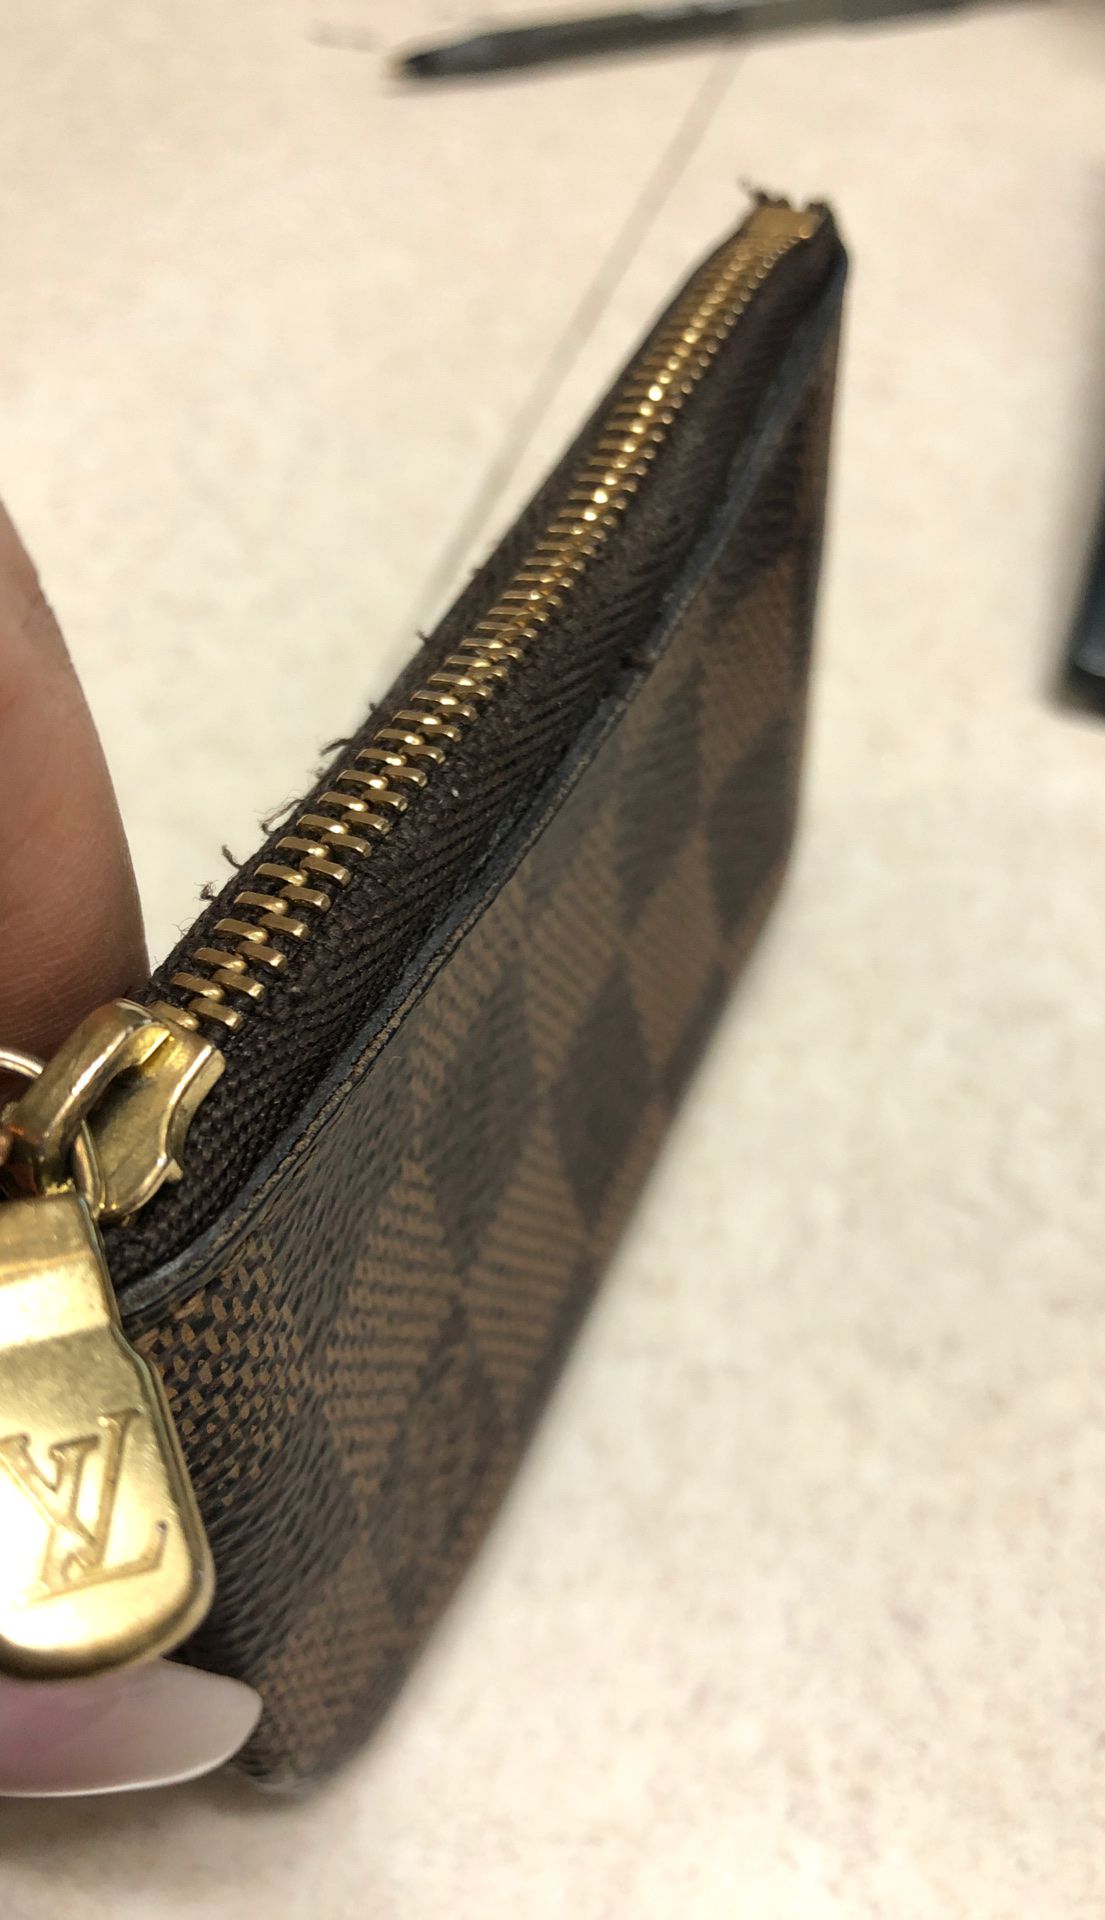 LV Small Key Chain Wallet for Sale in Roseville, CA - OfferUp